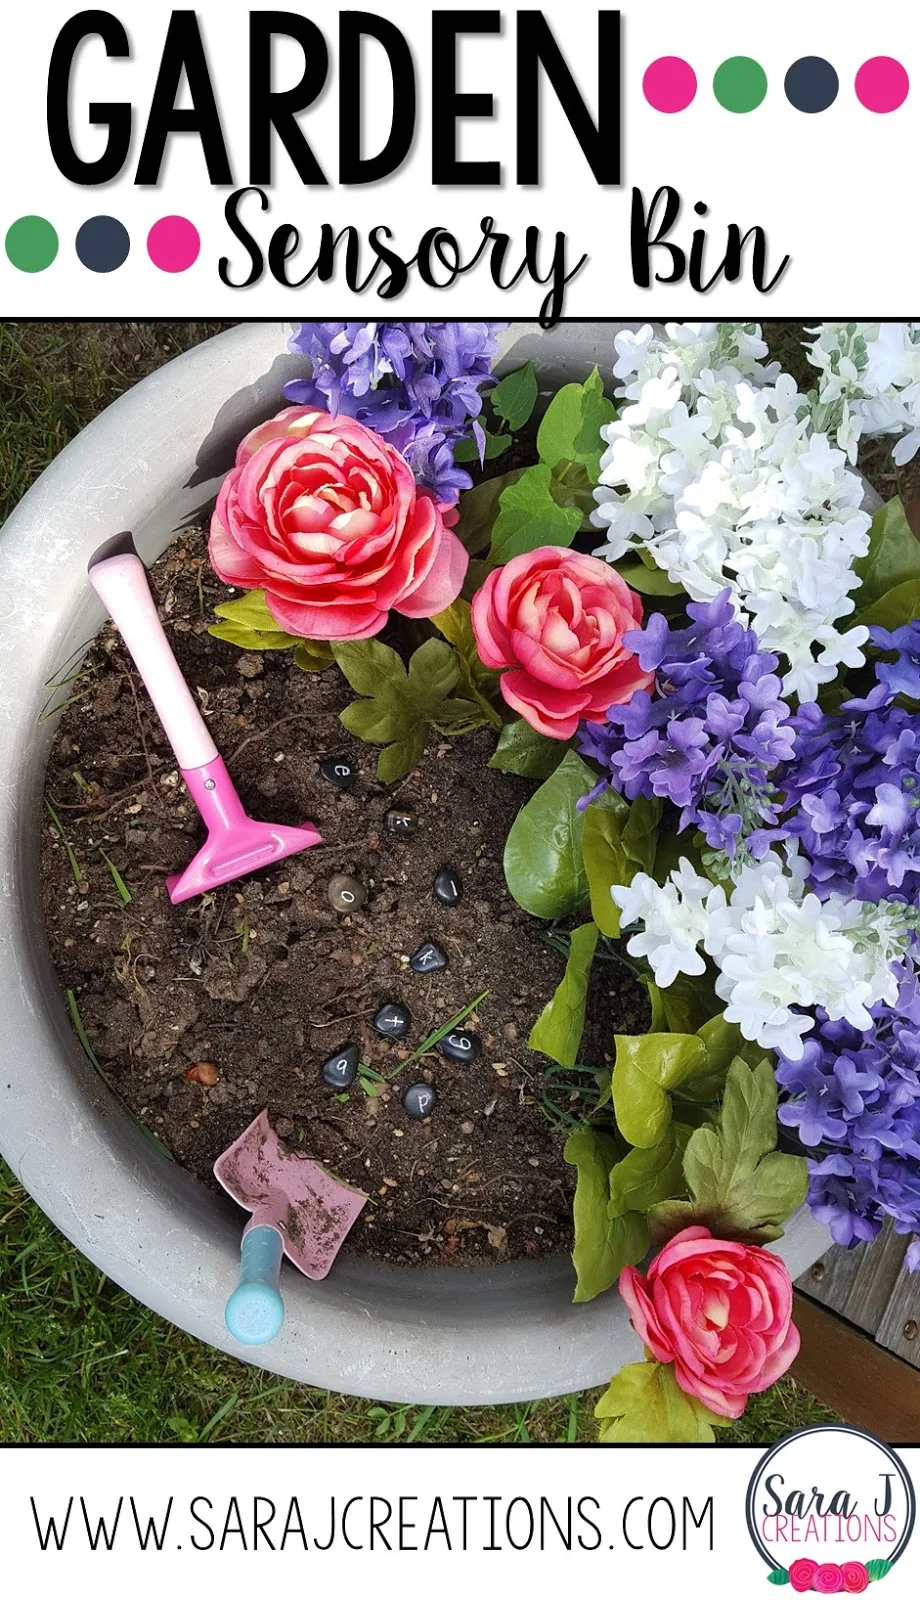 Love this cute Garden Sensory bin for preschool or even toddlers. Such a fun way to build fine motor and sensory skills while playing with flowers.